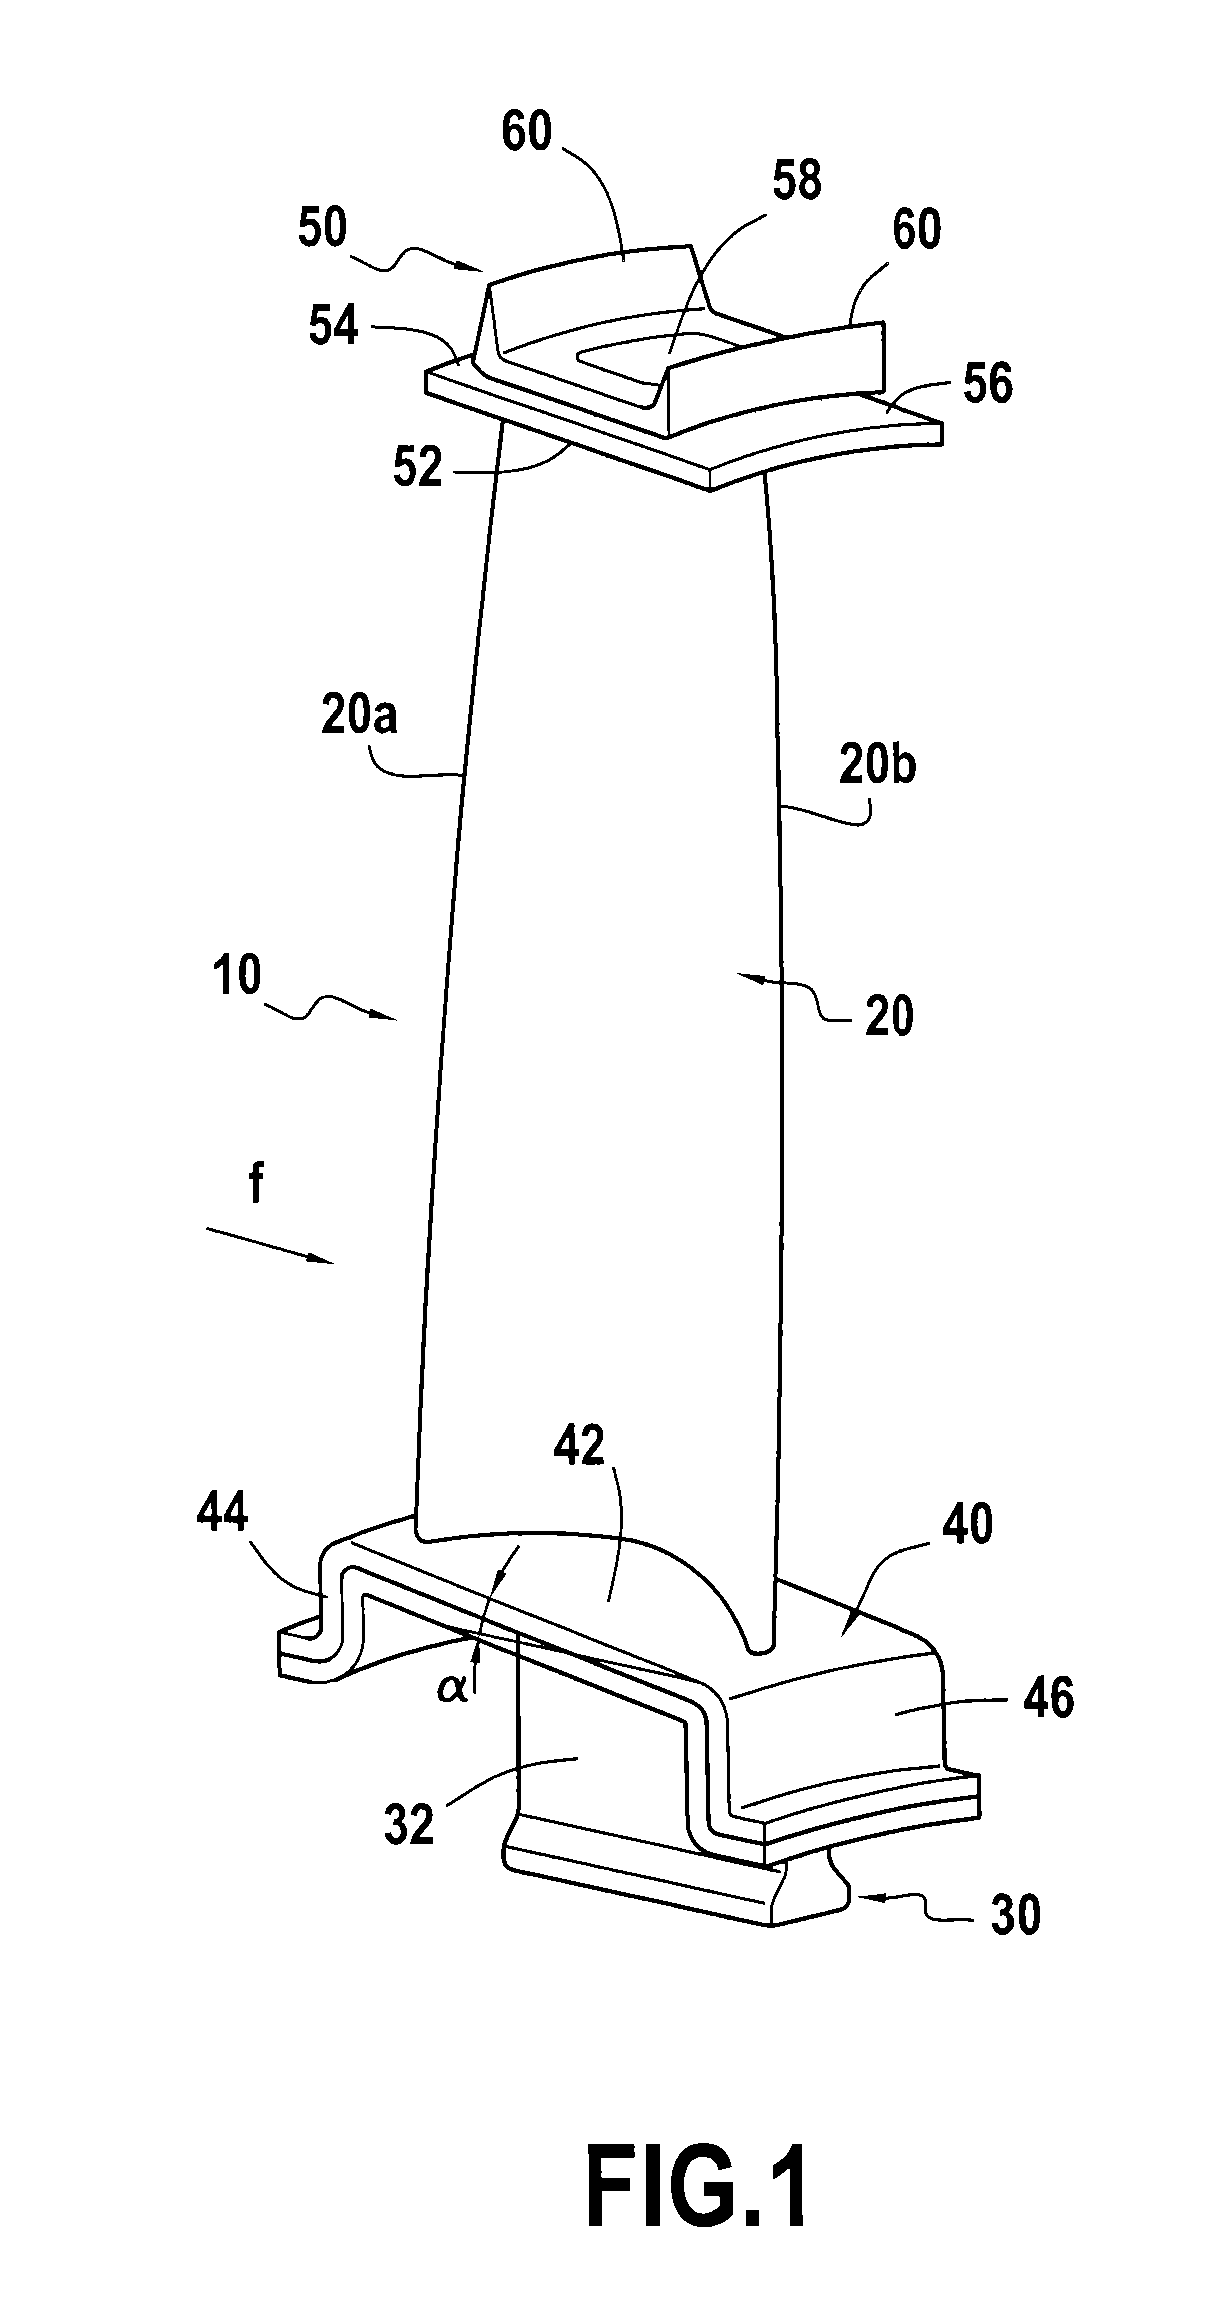 Turbine engine blade or vane made of composite material, turbine nozzle or compressor stator incorporating such vanes and method of fabricating same